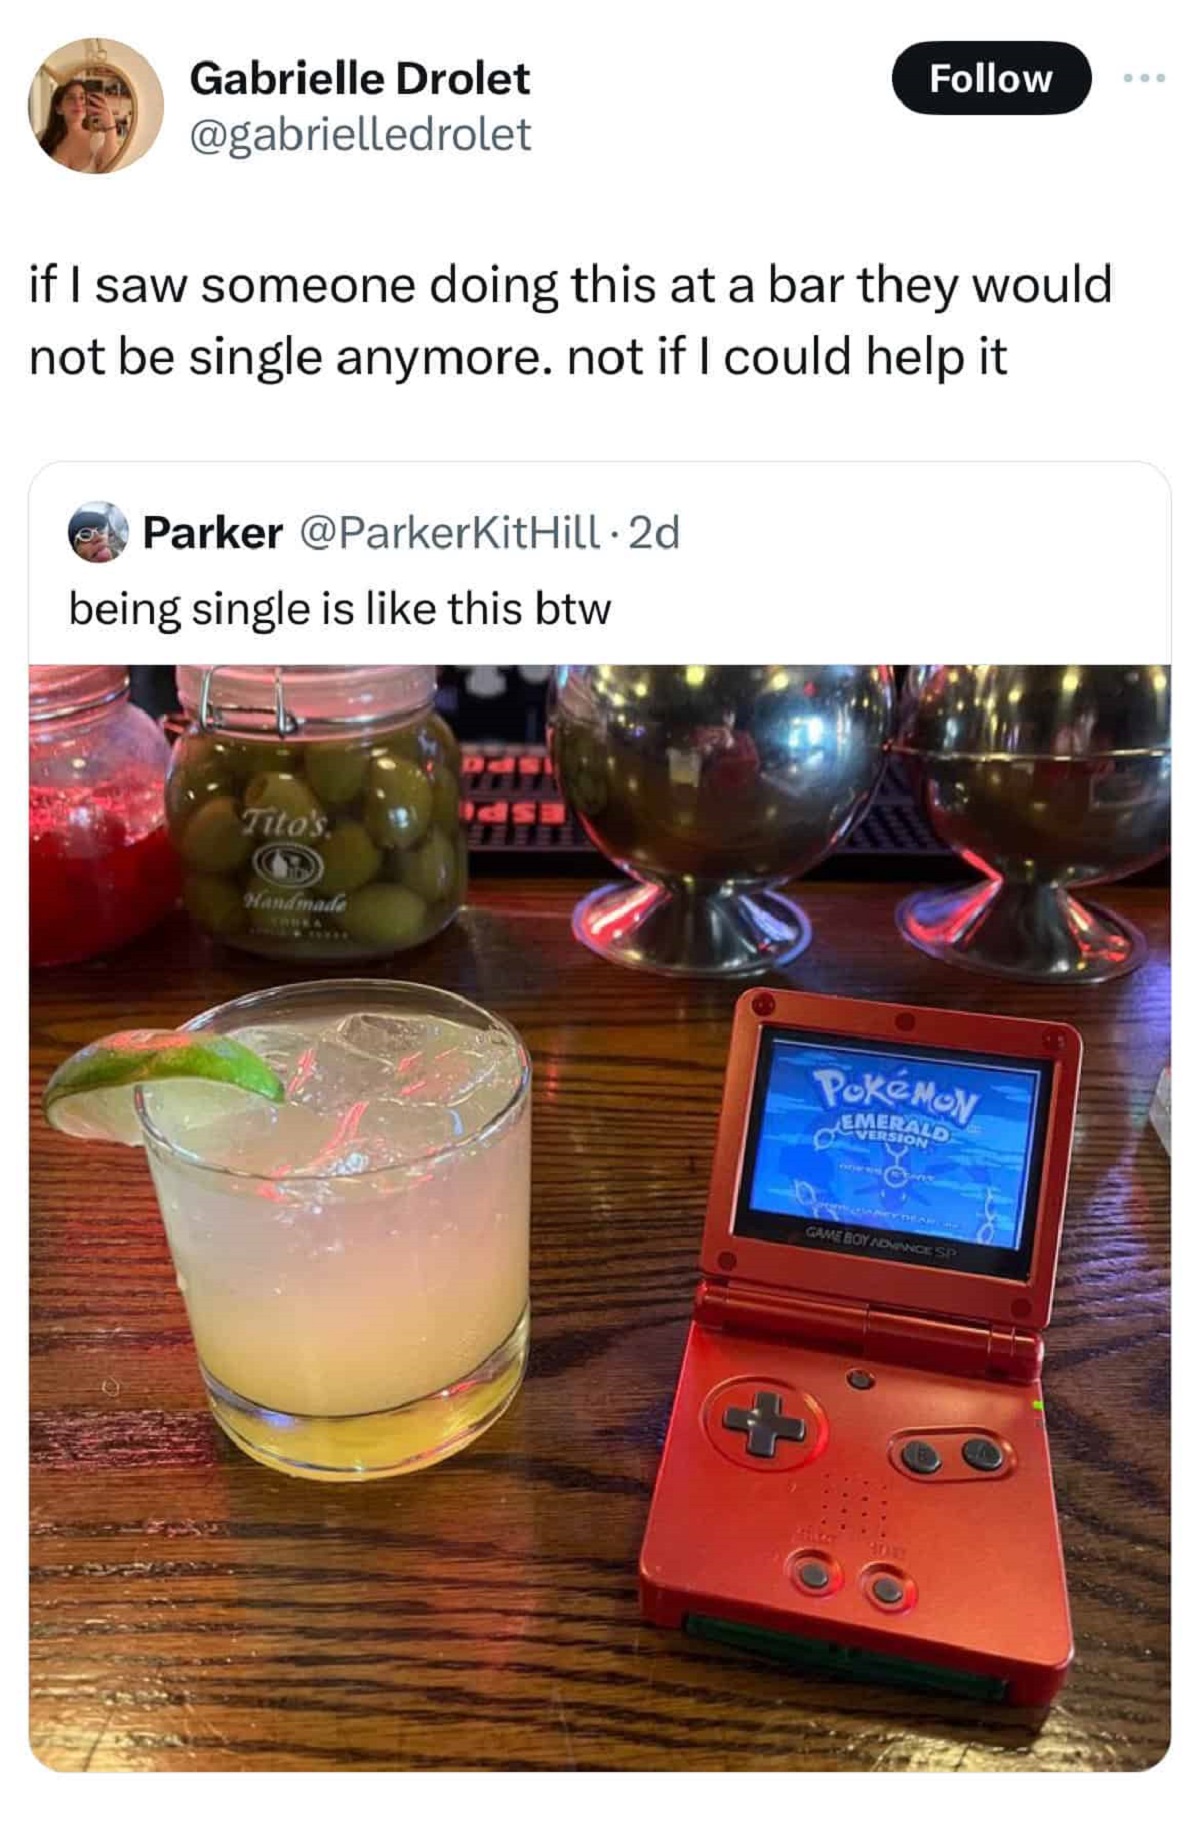 Video game - Gabrielle Drolet if I saw someone doing this at a bar they would not be single anymore. not if I could help it Parker being single is this btw Tita PokeMay